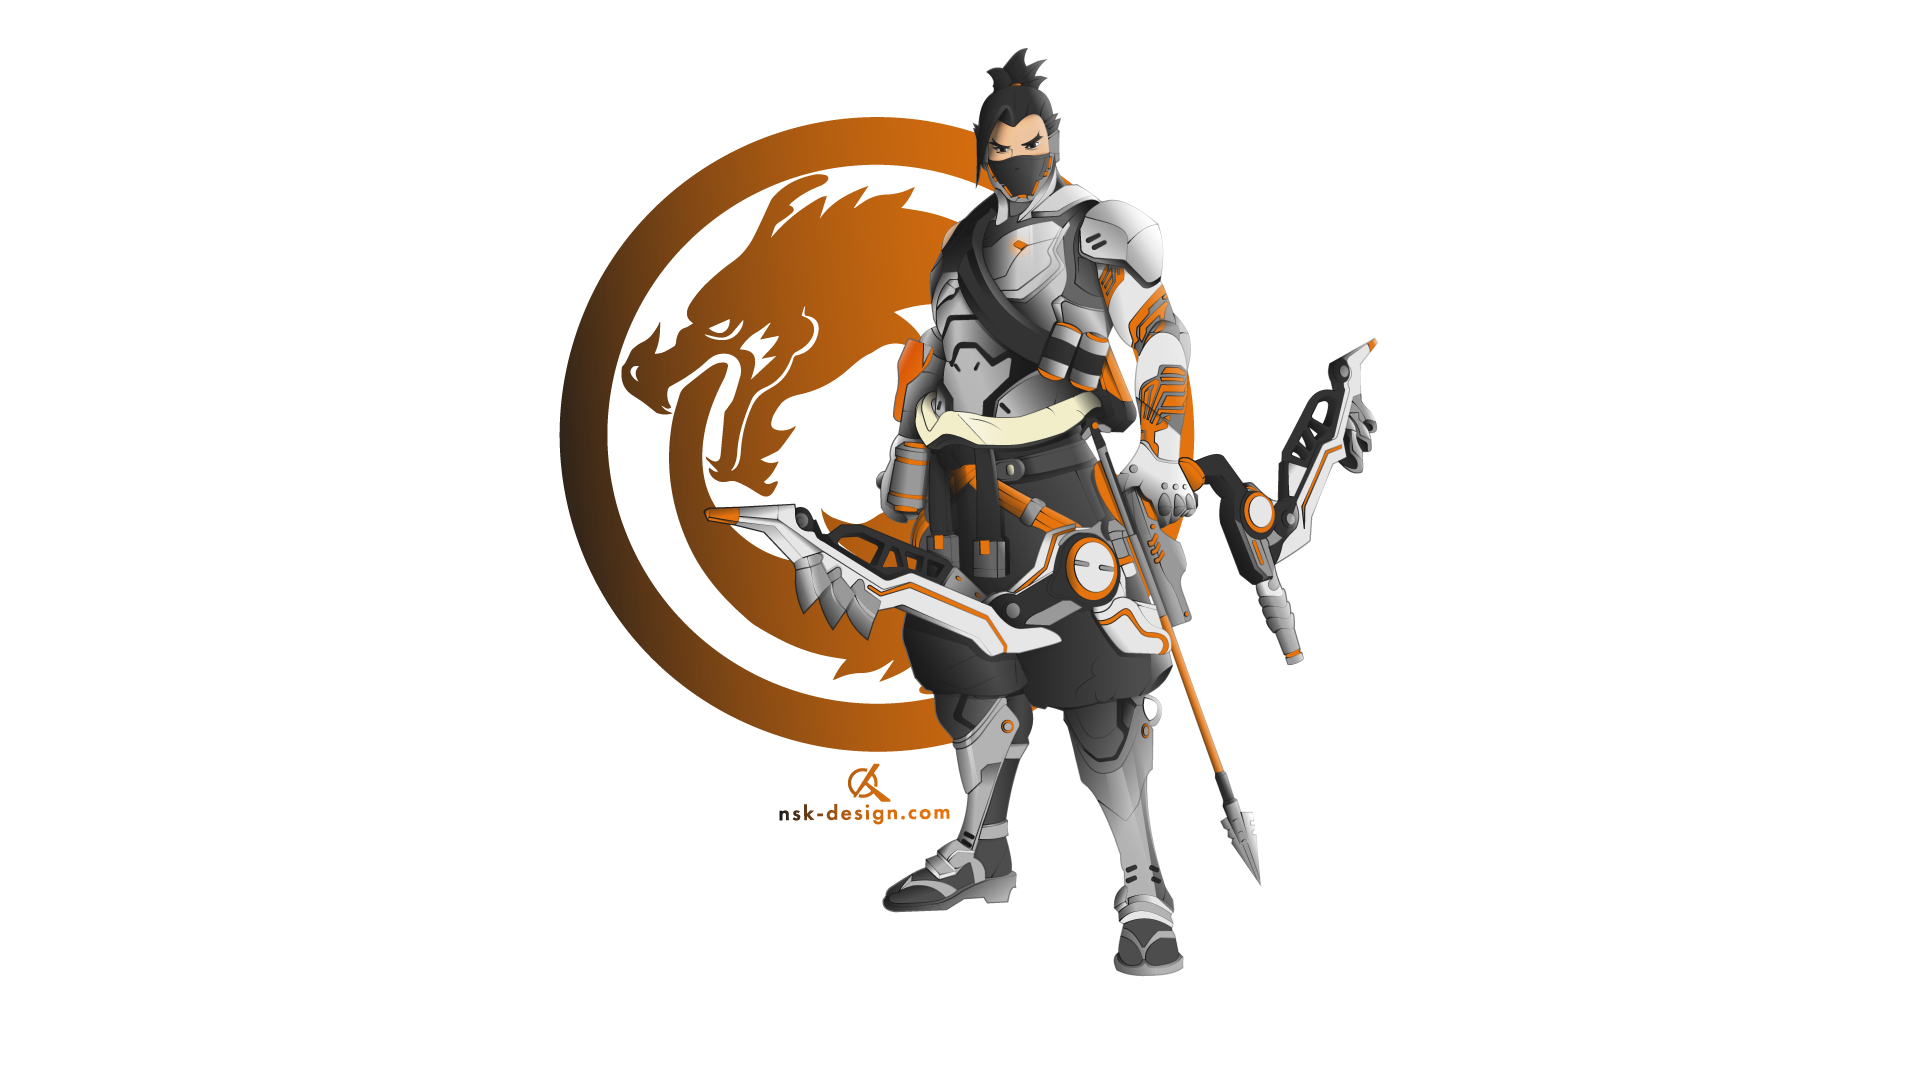 General 1920x1080 Overwatch vector minimalism Hanzo (Overwatch) Blizzard Entertainment simple background video games video game characters